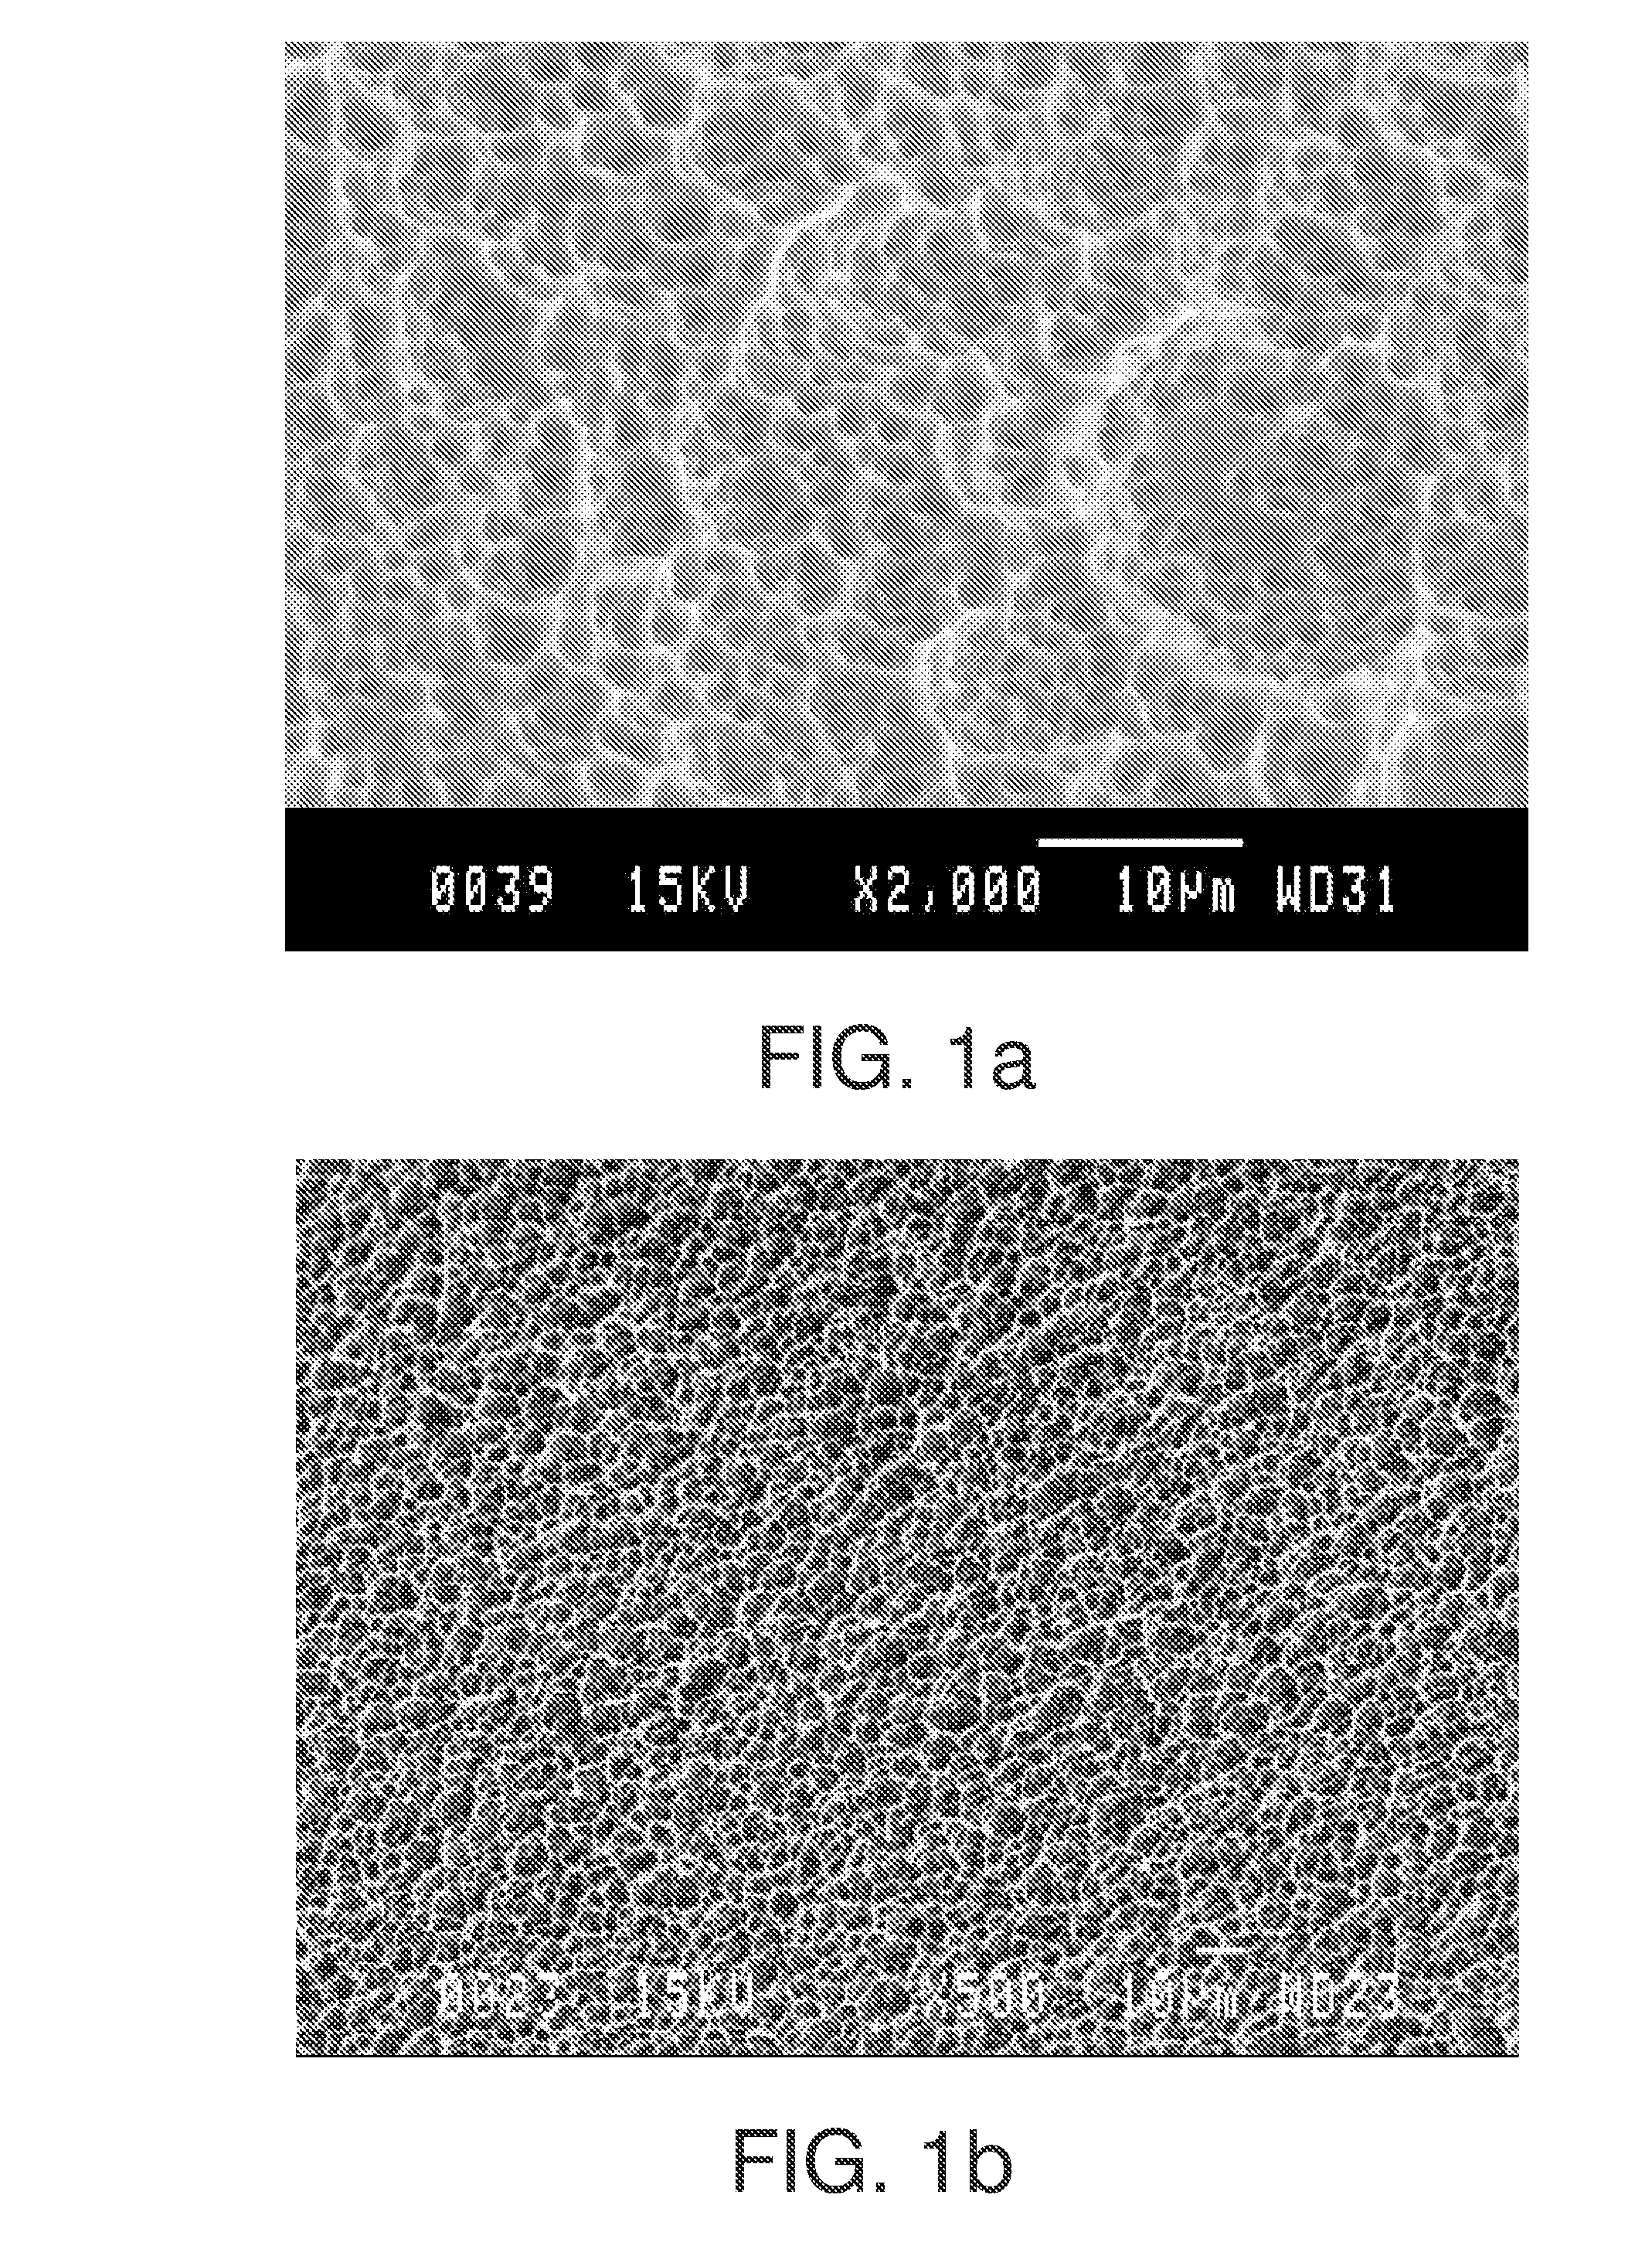 Method for obtaining a surface of titanium-based metal implant to be inserted into bone tissue